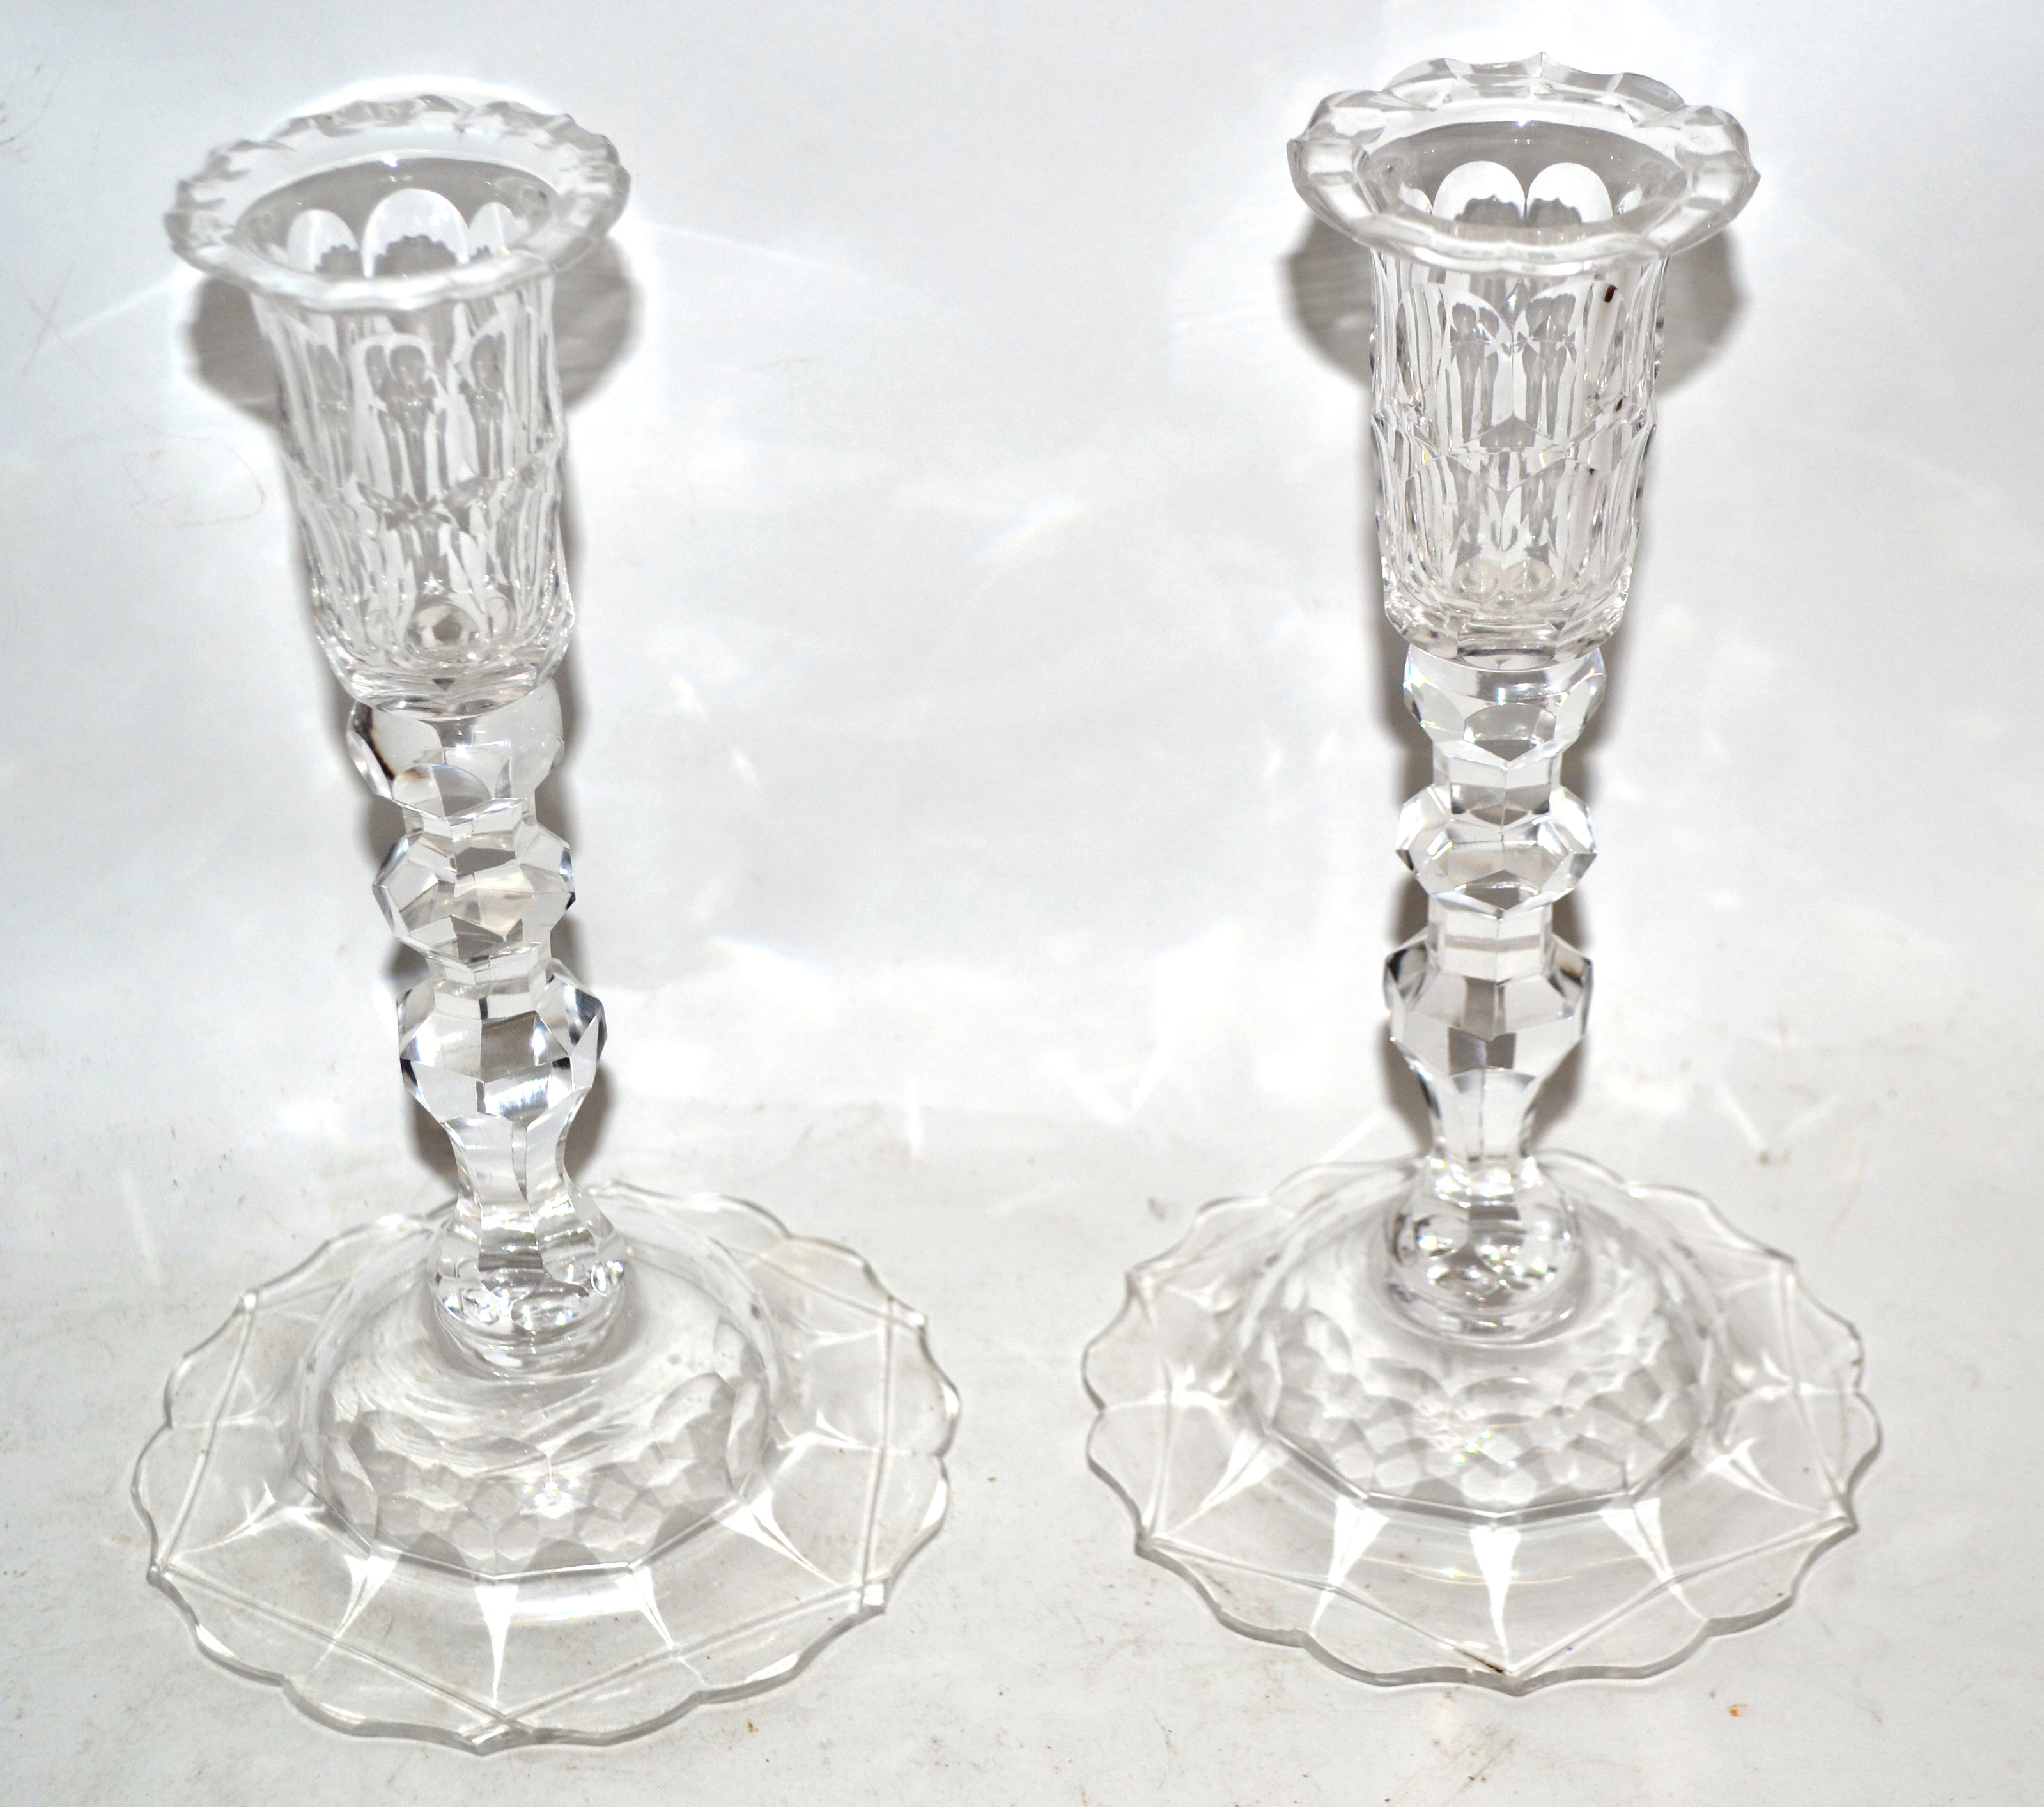 Pair of glass candlesticks, 19th century, with knopped faceted stems on a domed base, 23cm high